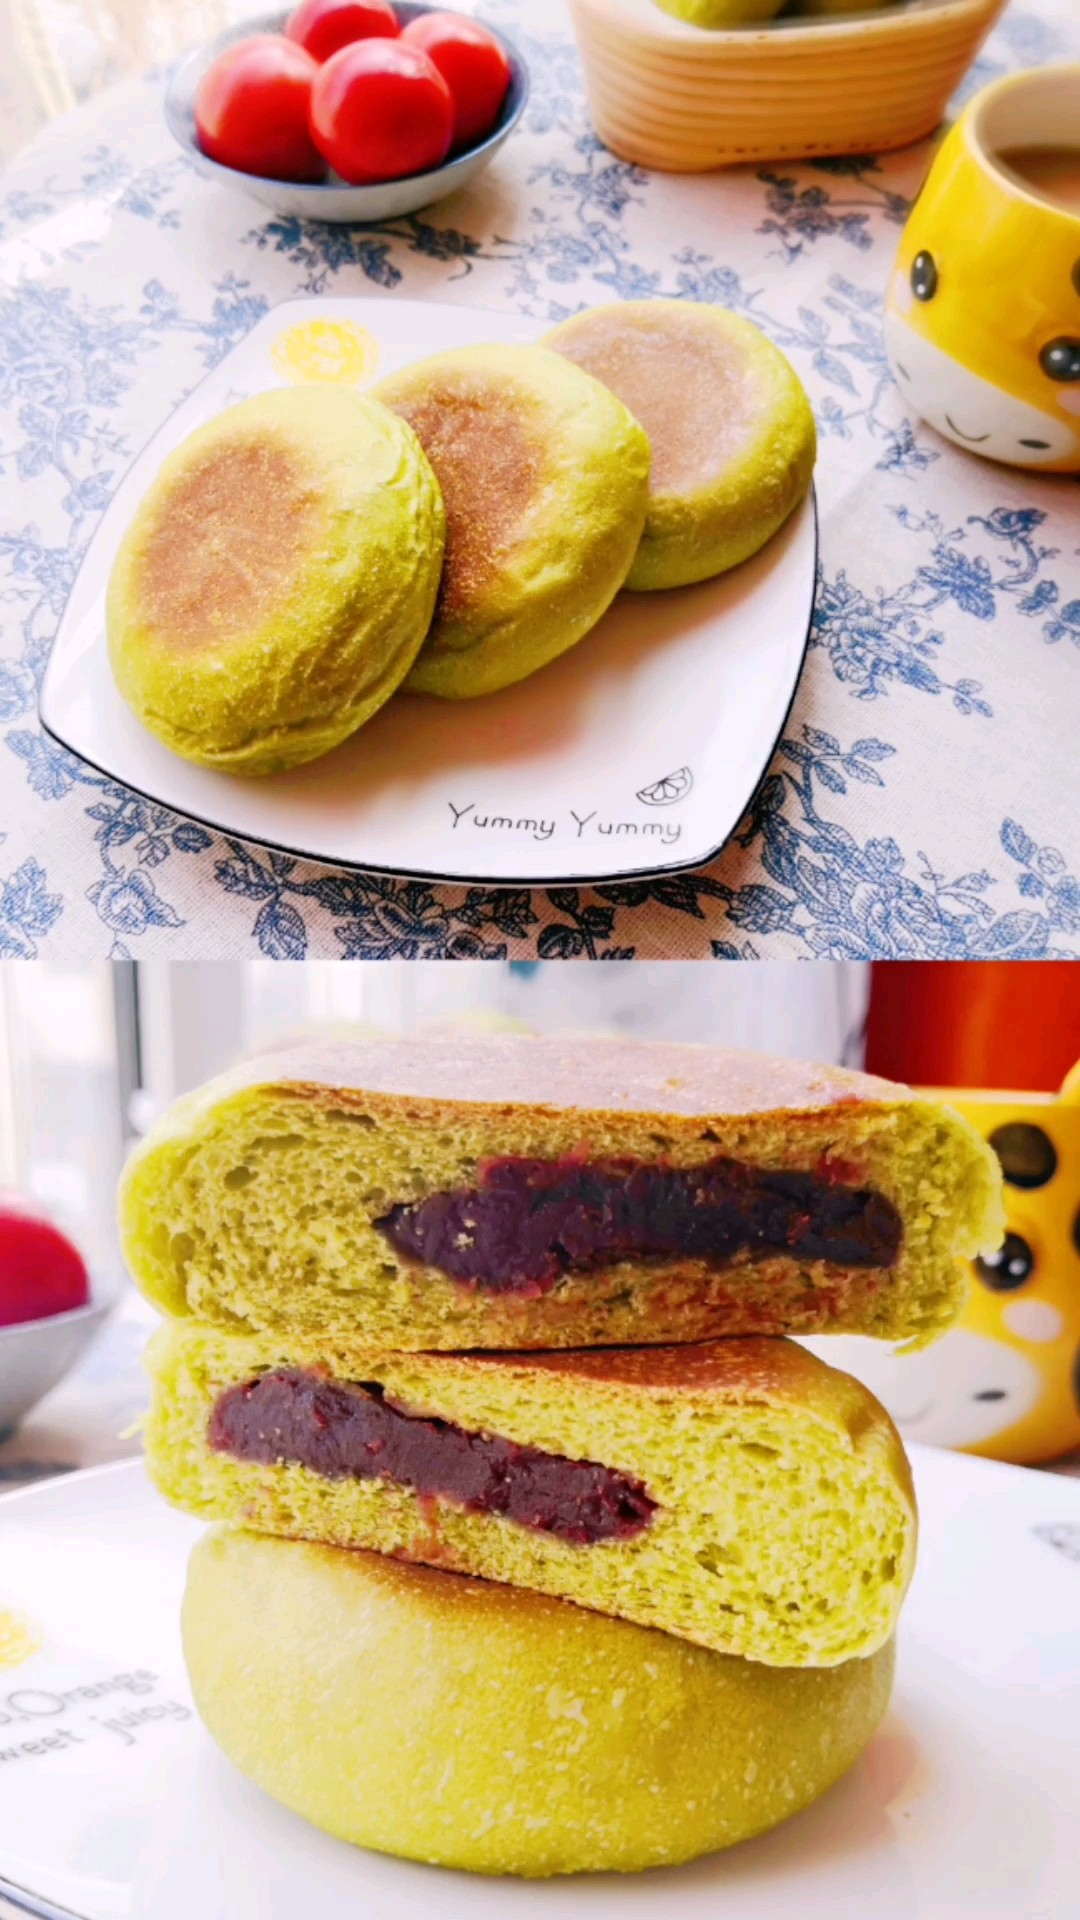 Take It for A Spring Outing, Japanese-style Red Bean Buns